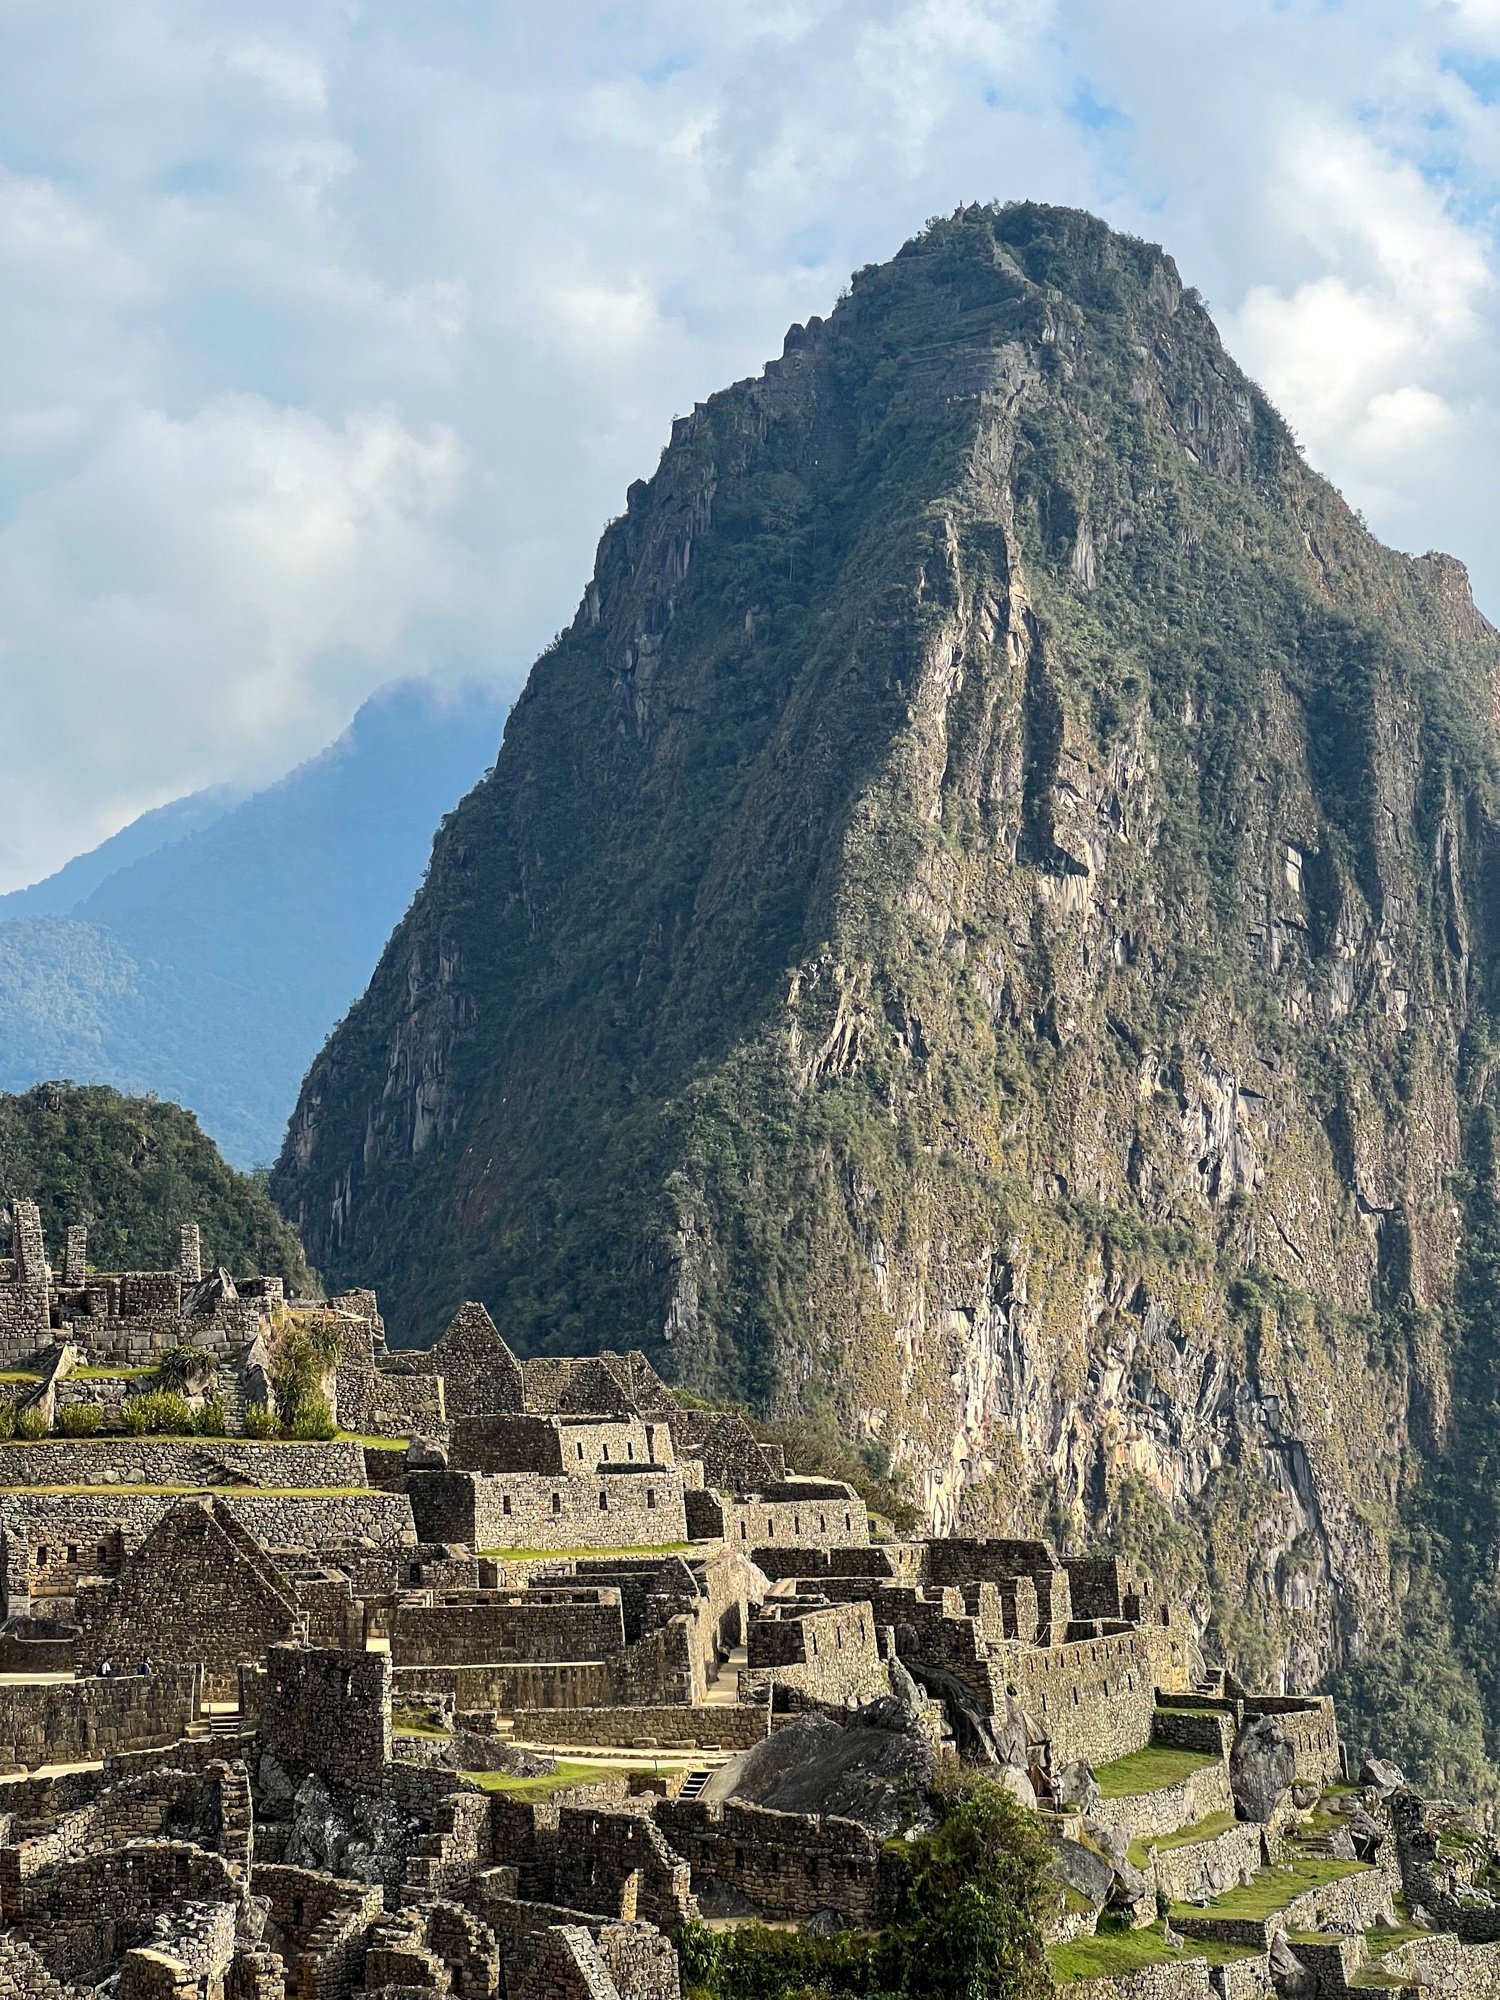 Huayna Picchu mountain towers over the ruins of Machu Picchu below (photo by Dave Lee)